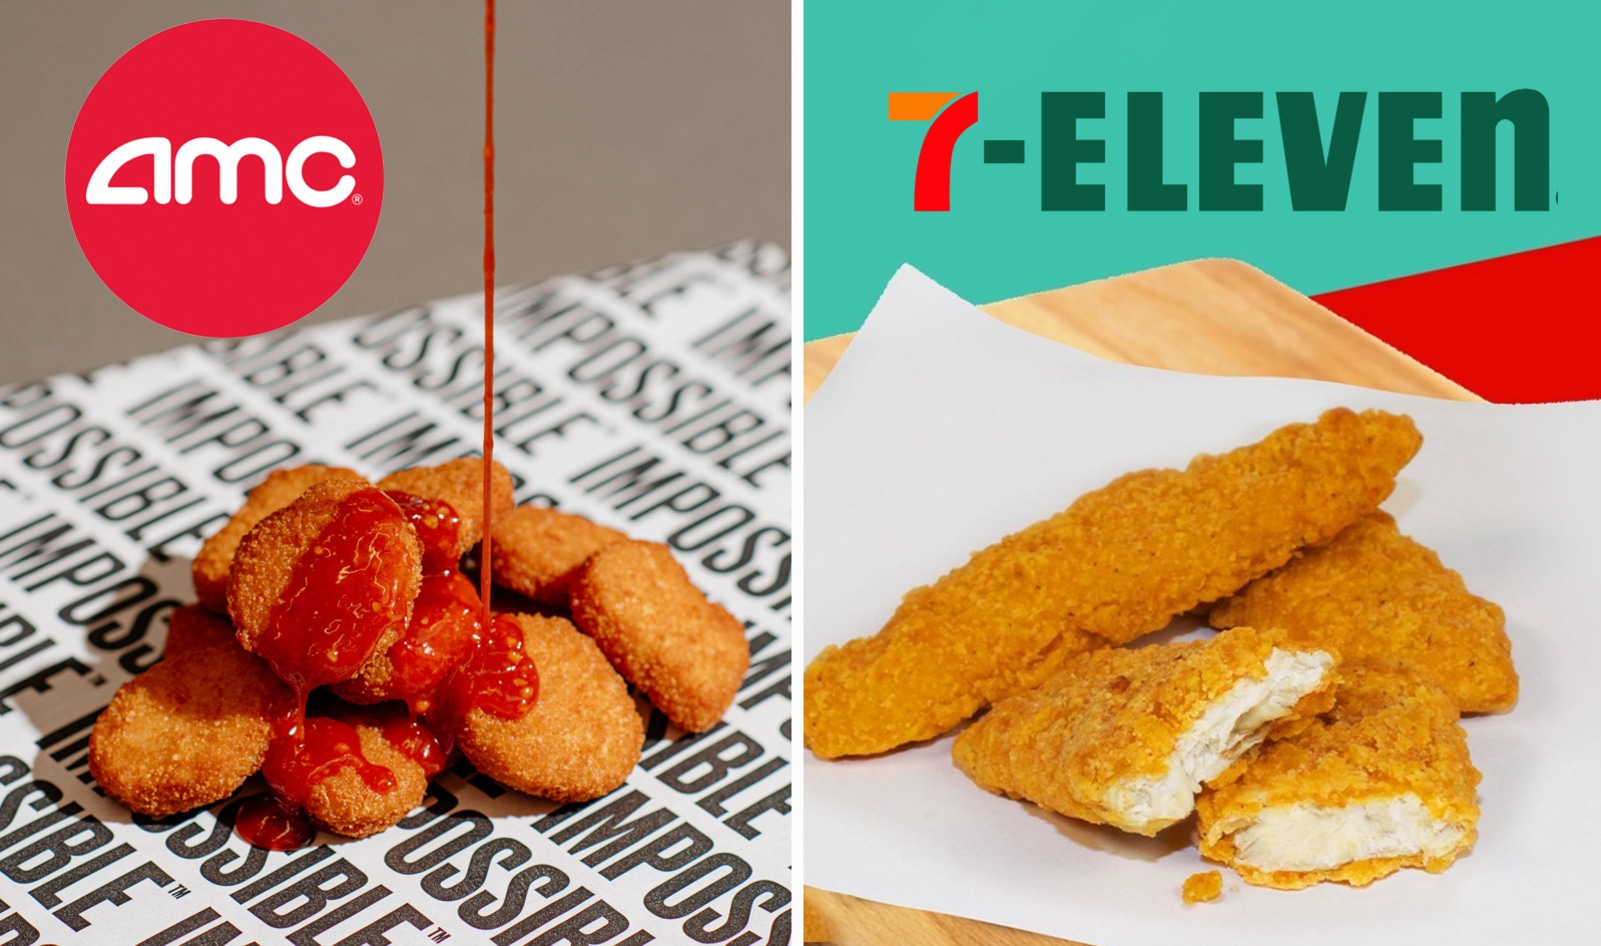 7-Eleven and AMC Theaters Embrace Meatless Chicken and More Vegan Food News of the Week